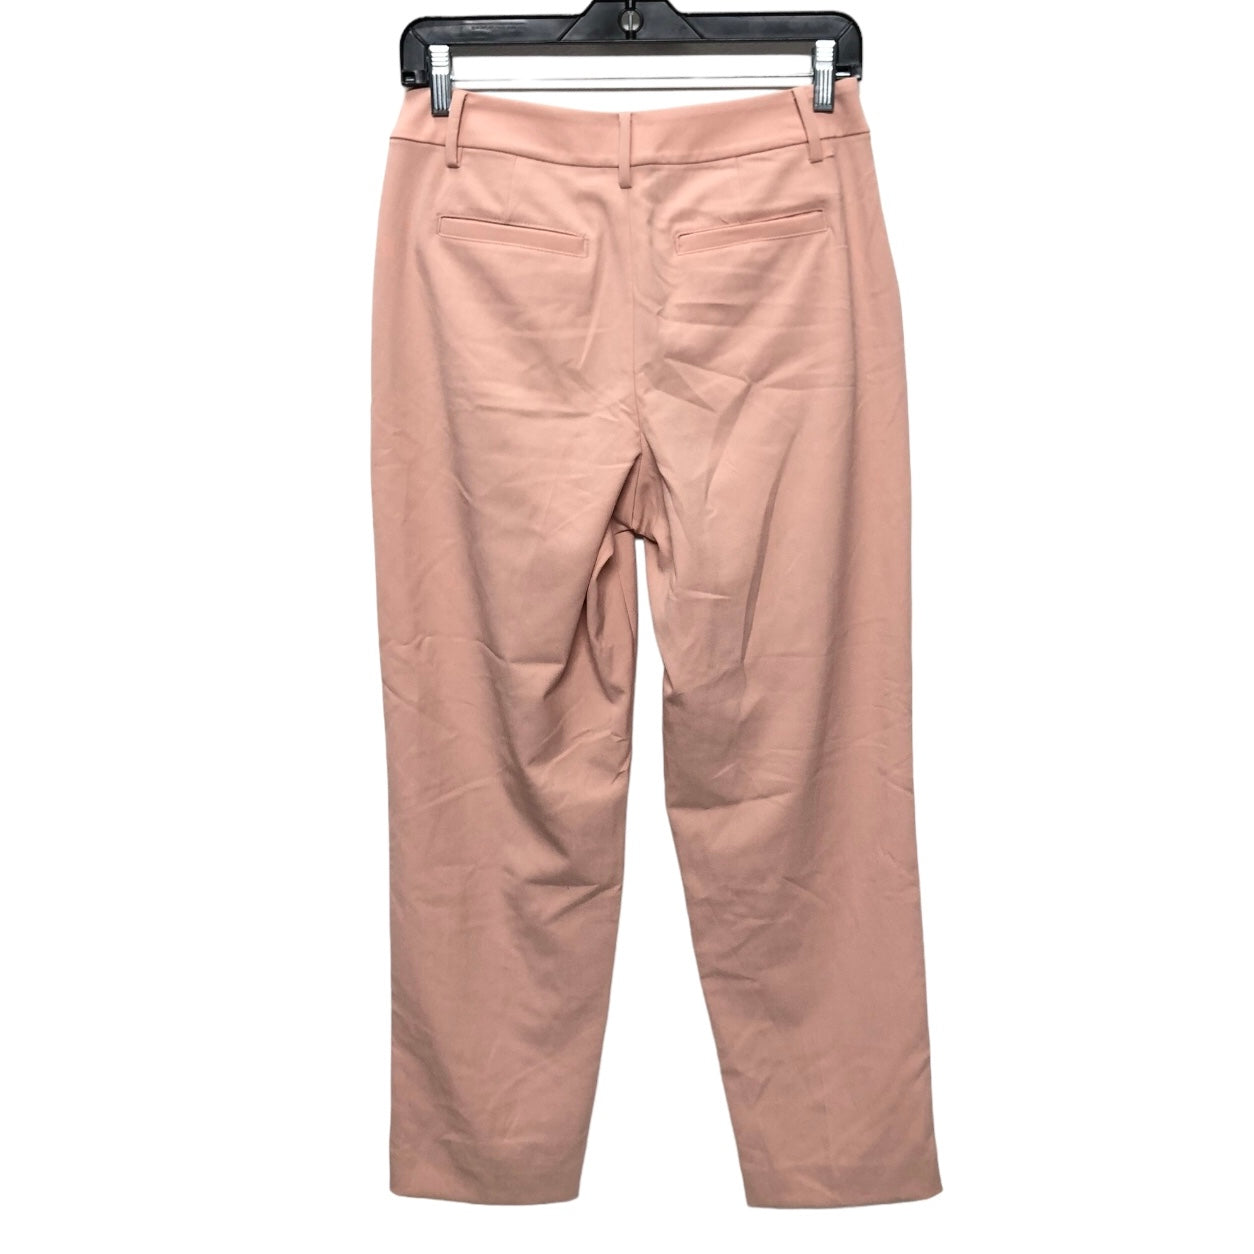 Pink Pants Cropped A New Day, Size 2